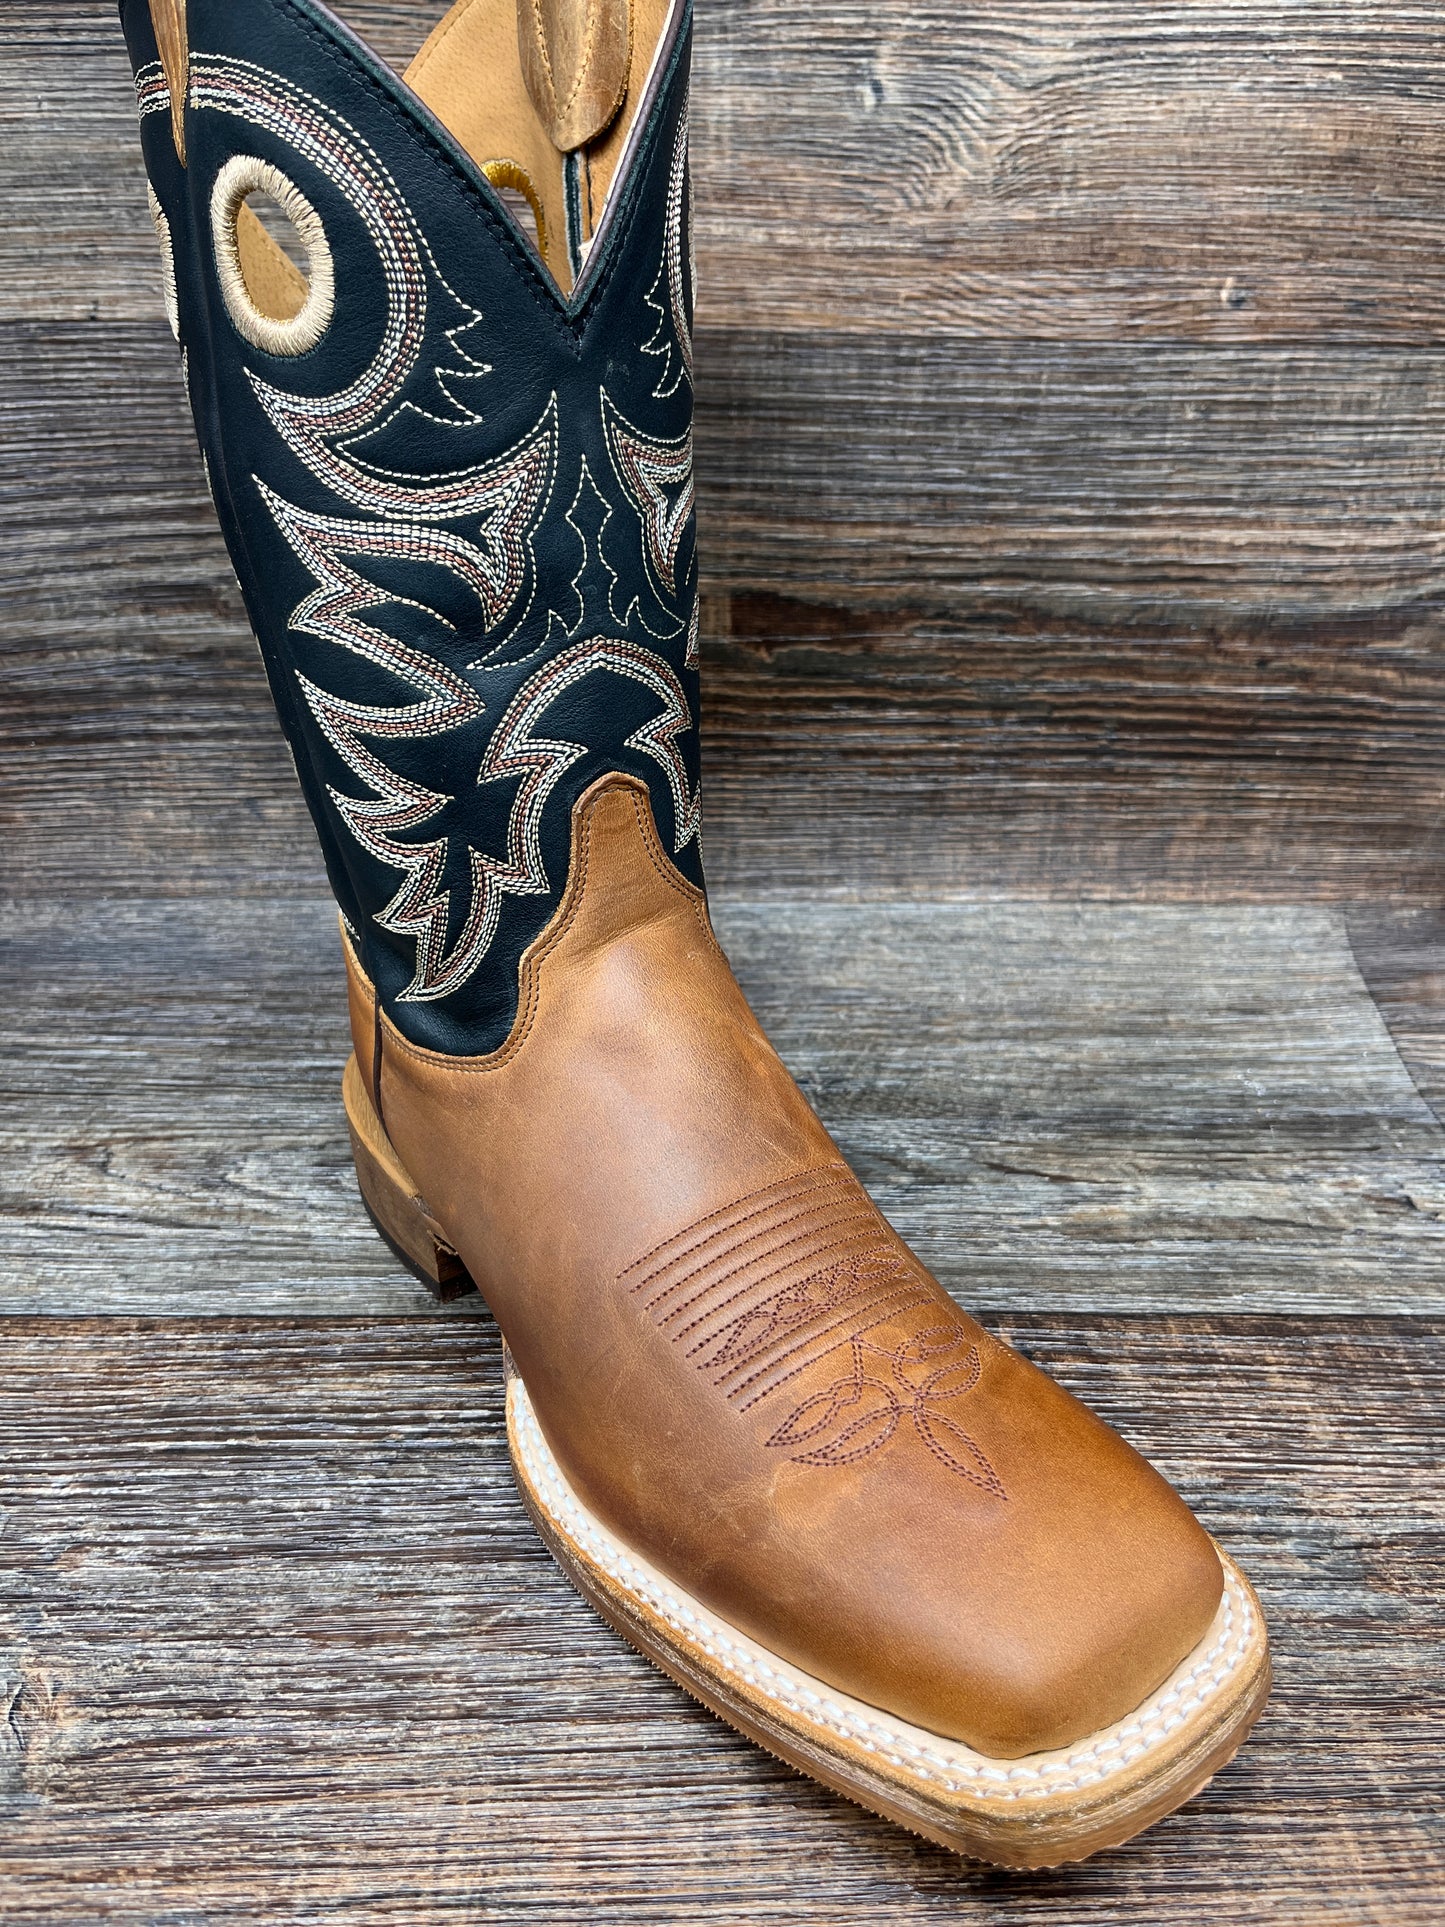 br740 Men's Caddo Square Toe Western Boot by Justin